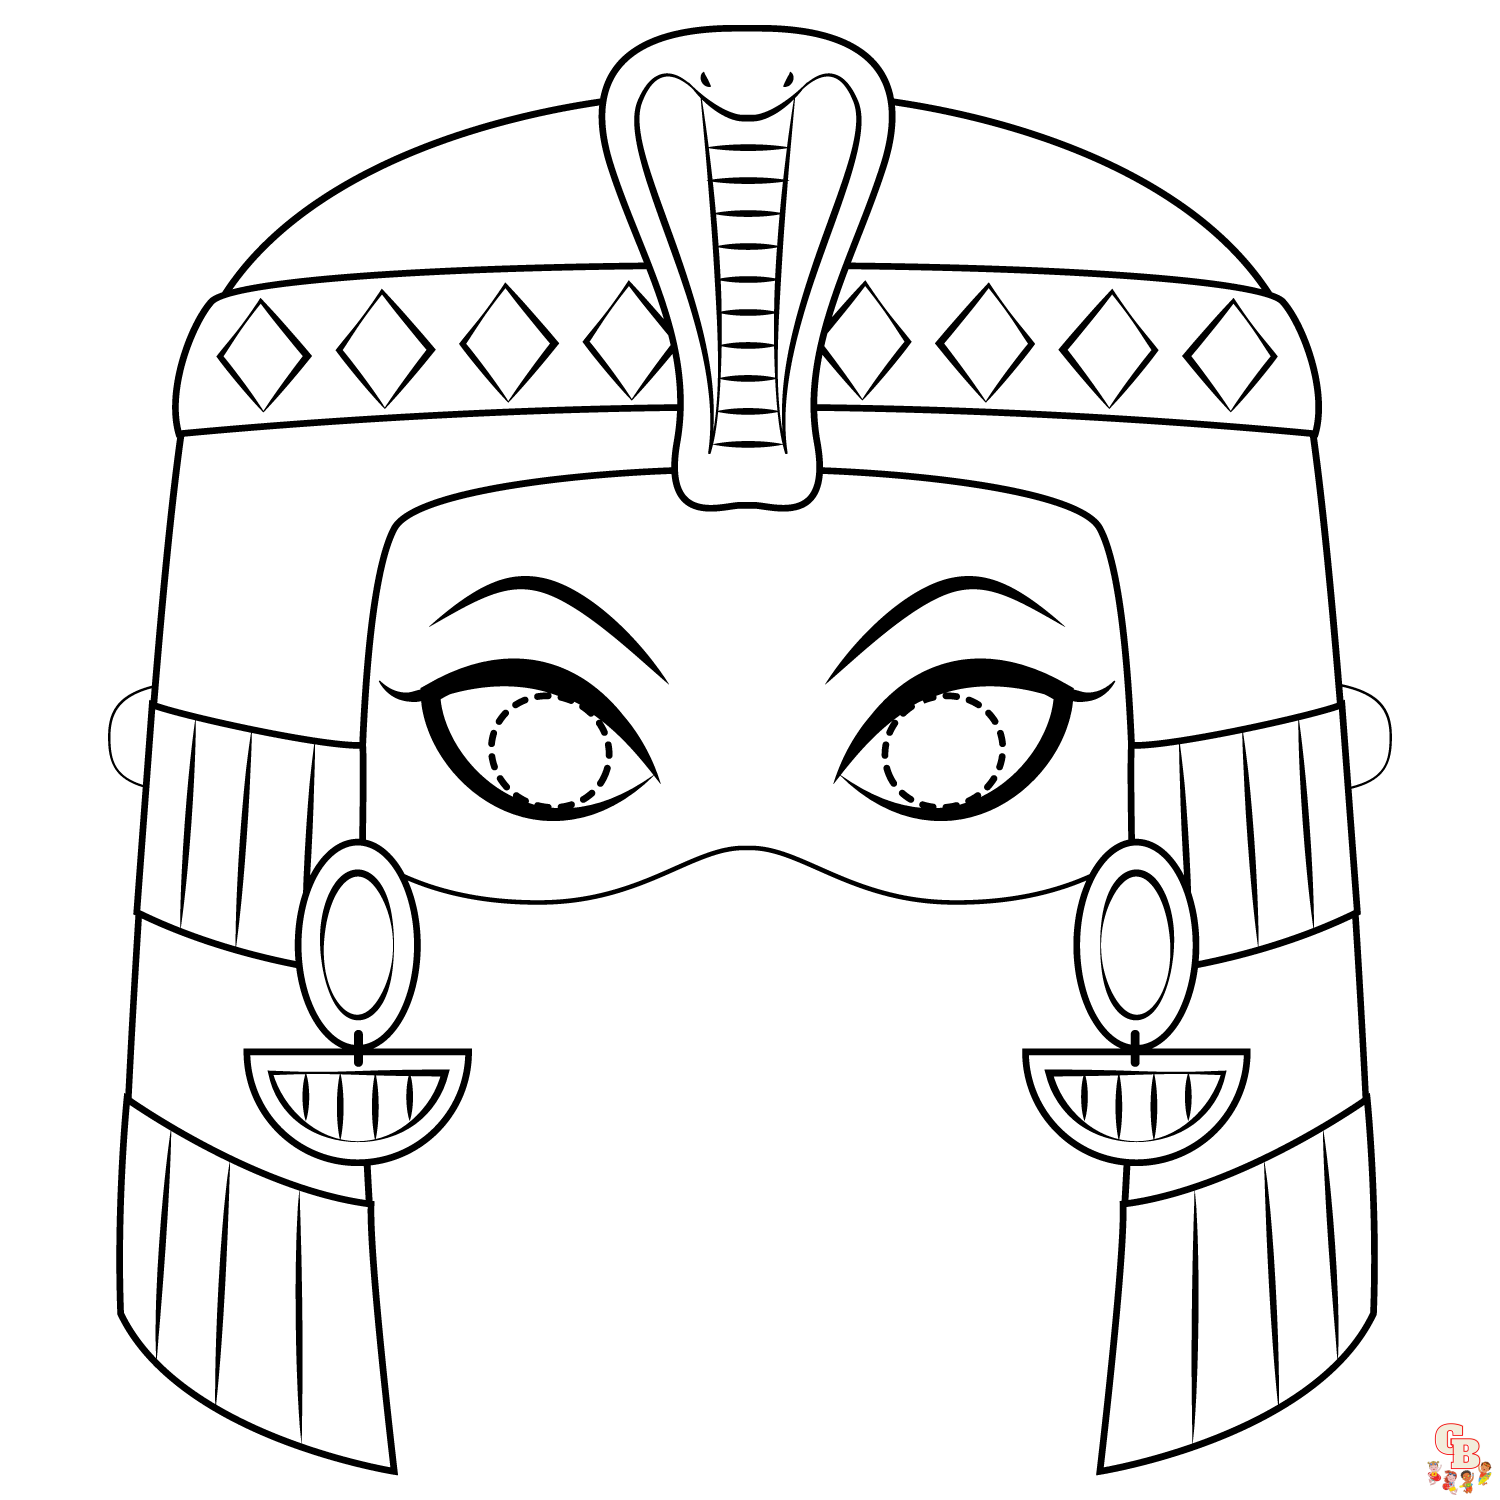 Egyptian Masks coloring pages 2